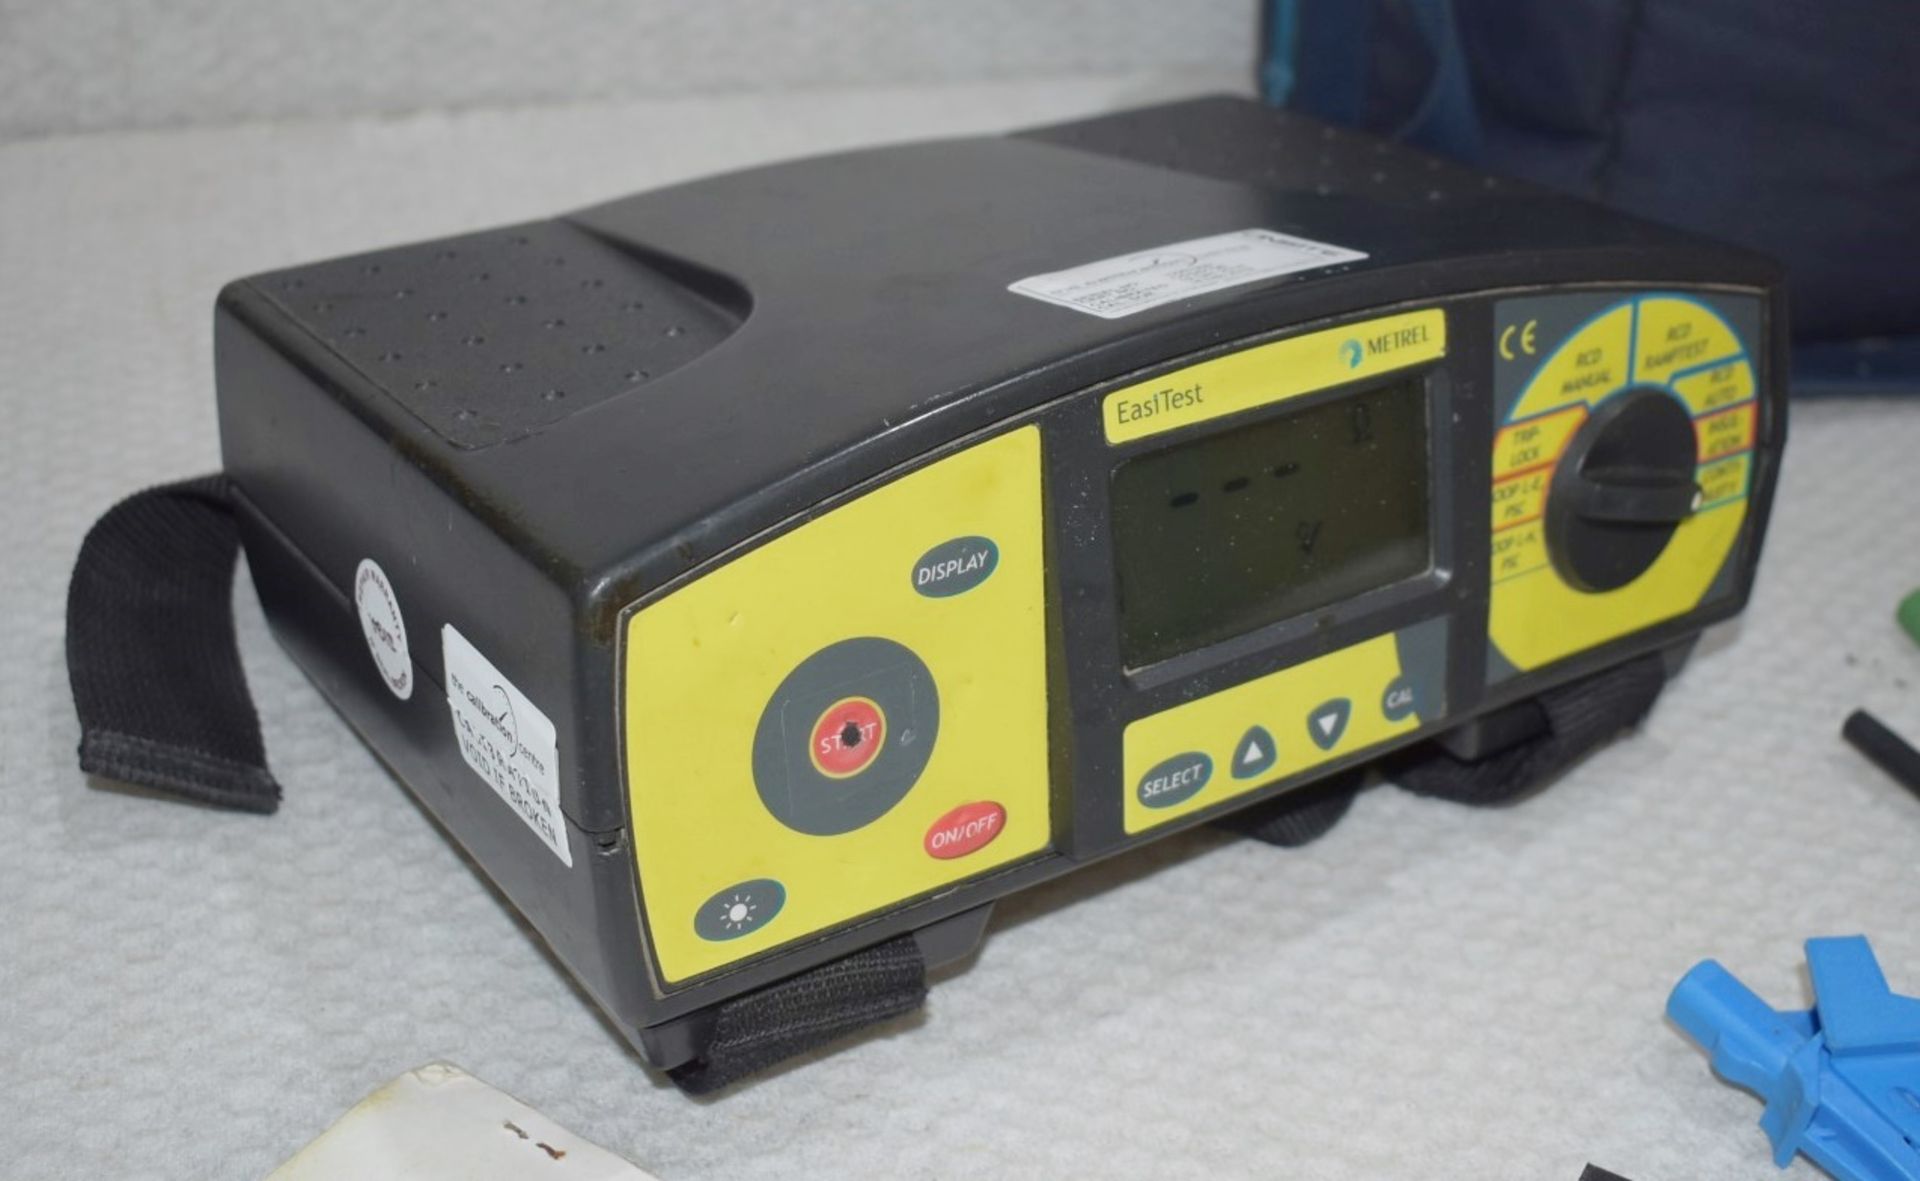 1 x METREL Easitest Multifunctional Portable Electrical Tester With Carry Case - Ref: DS7500 ALT - - Image 2 of 8